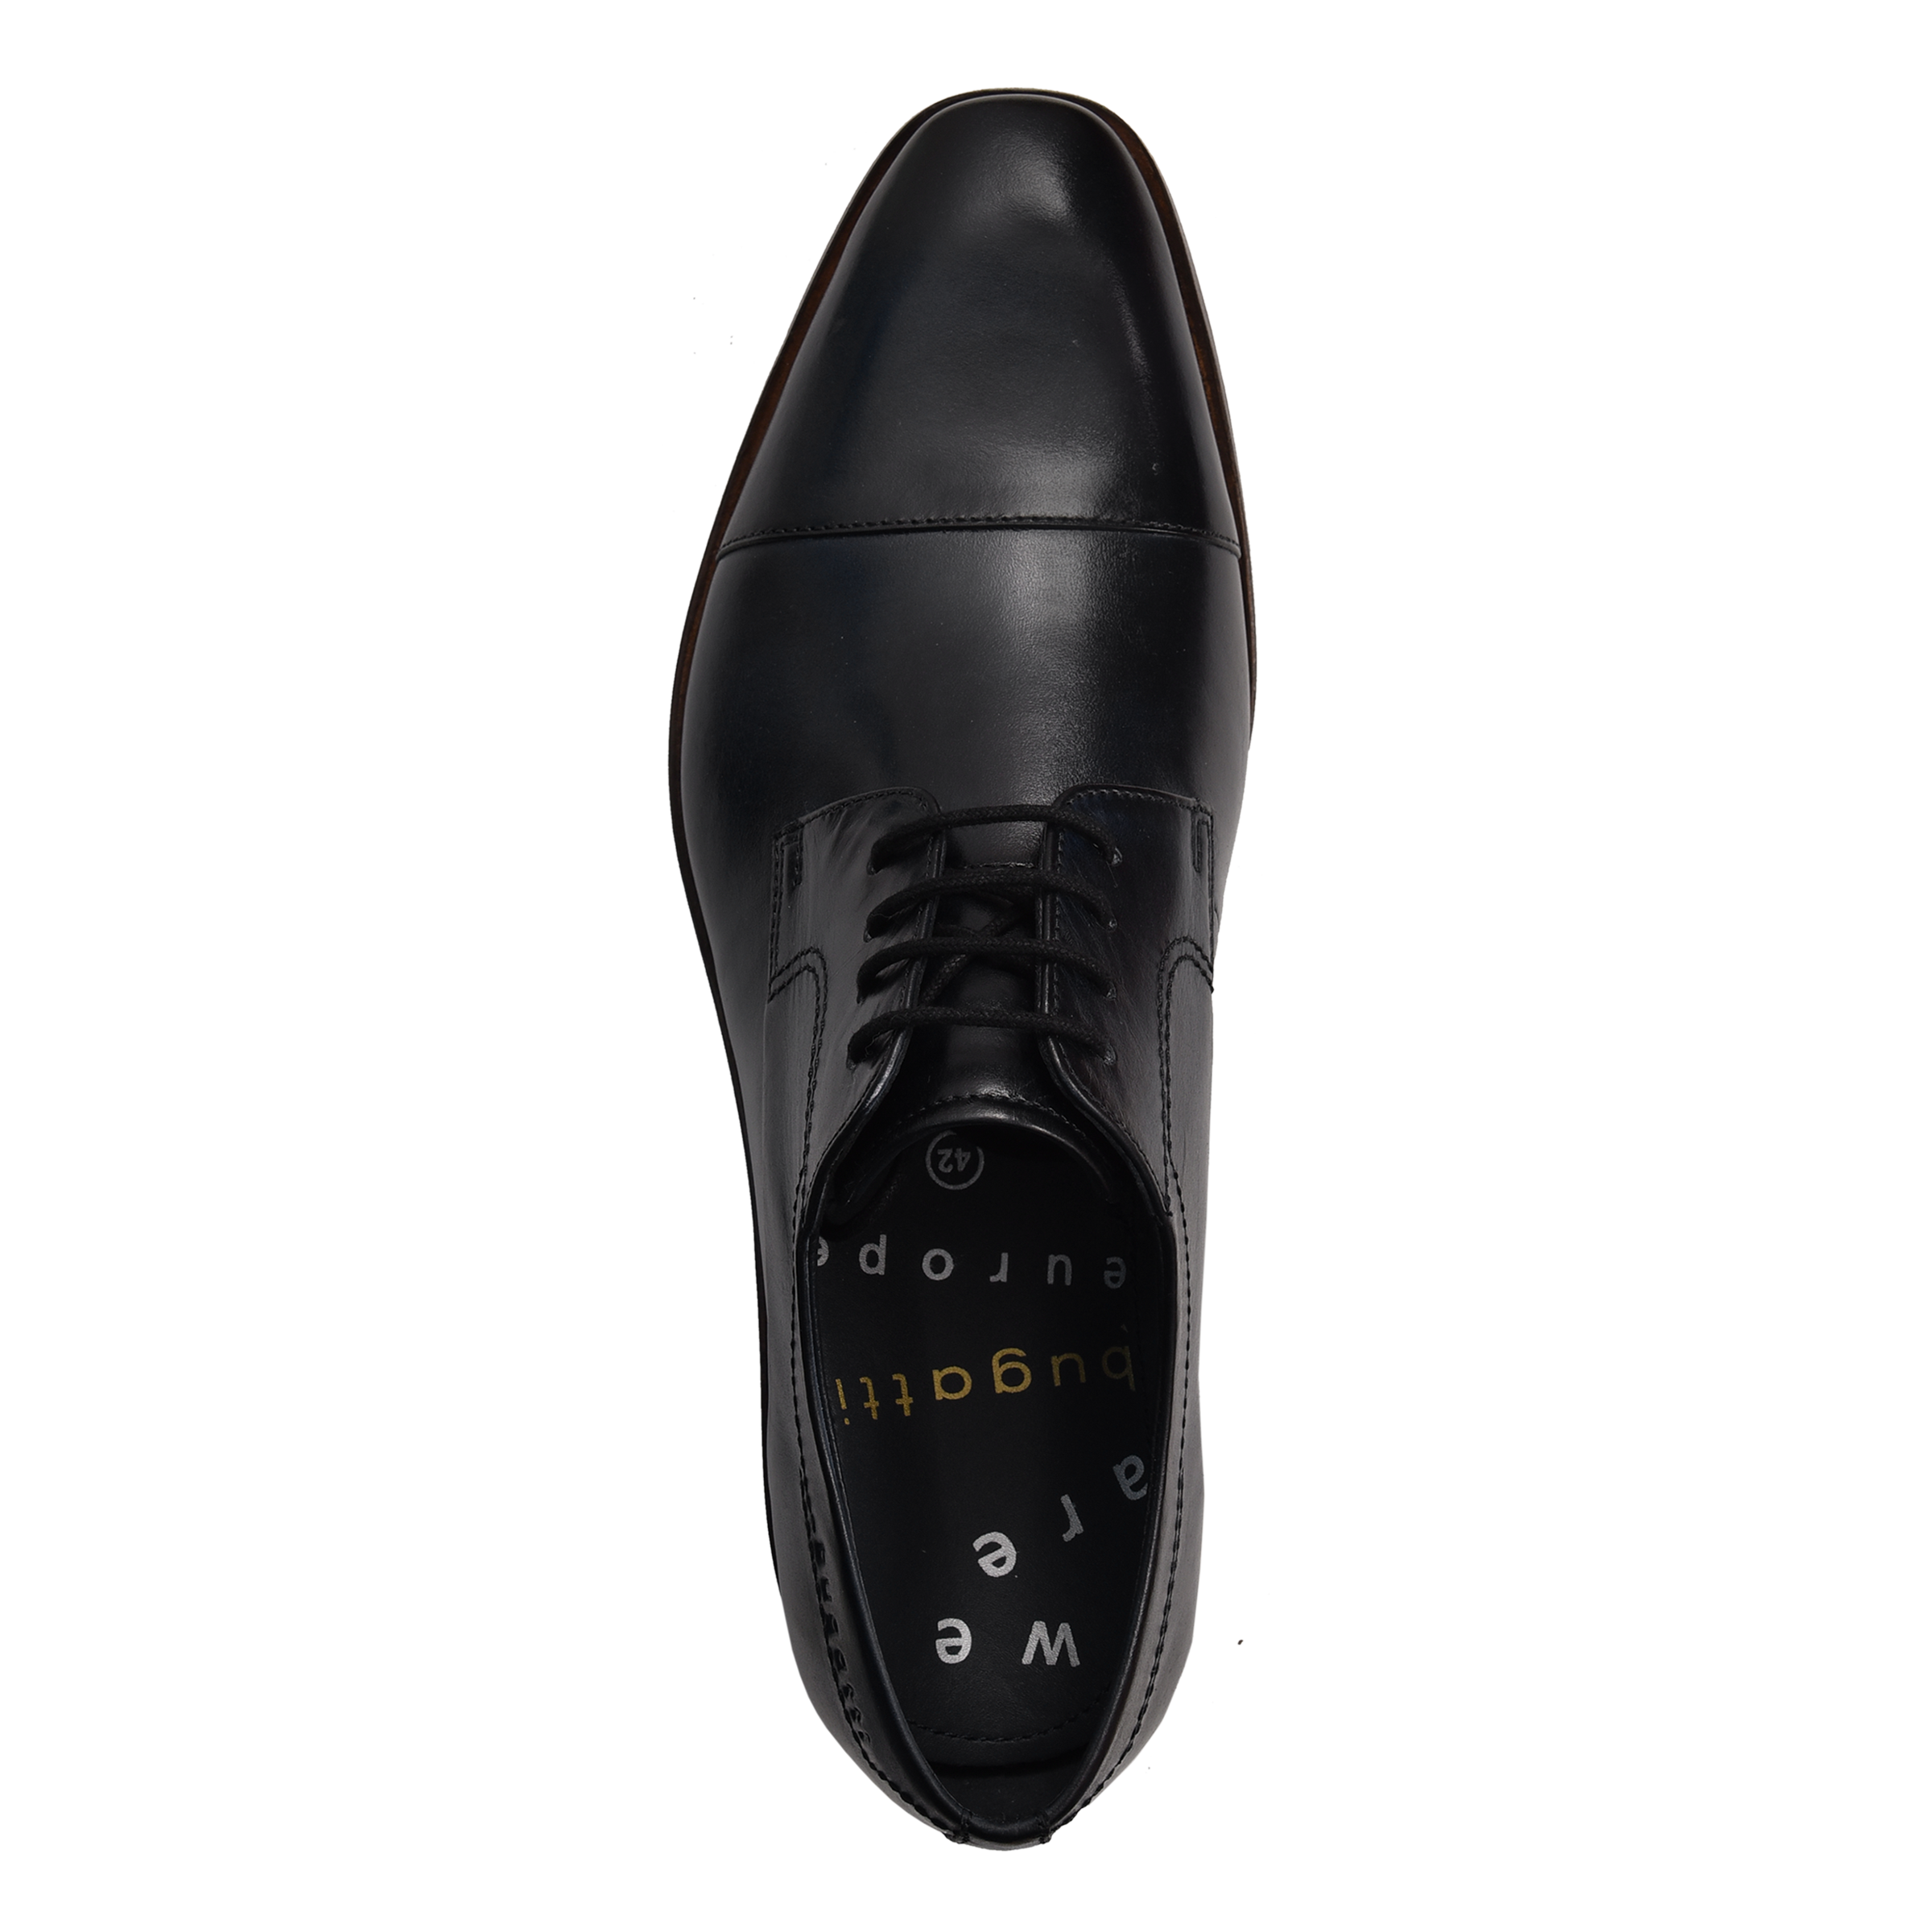 Business lace-up dark blue